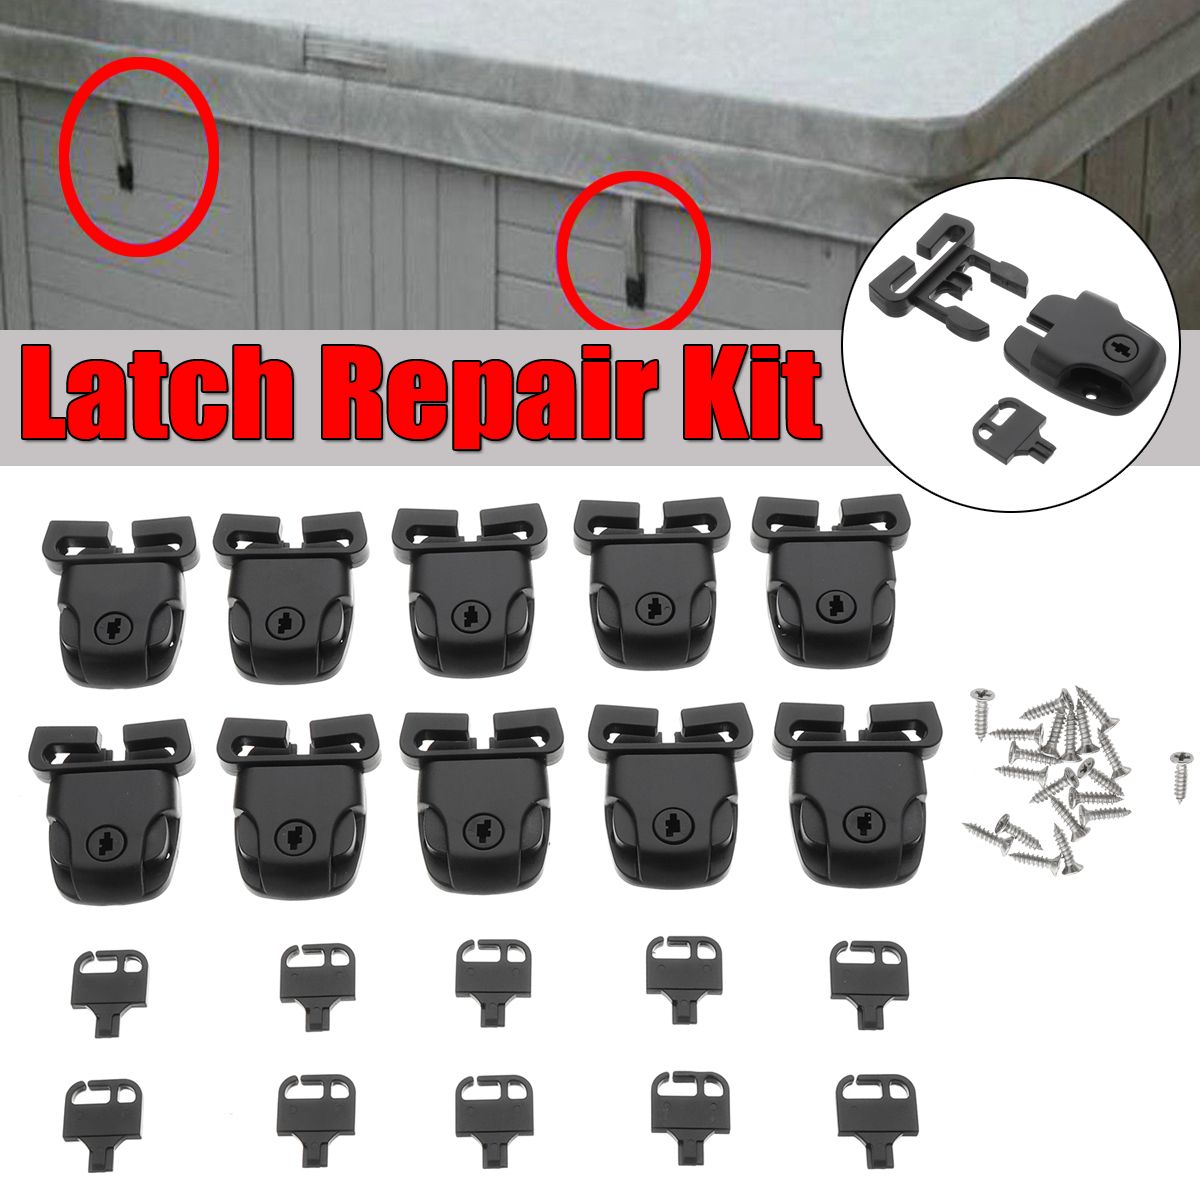 10PcsSet-Spa-Hot-Tub-Cover-Broken-Latch-Repair-Kit-Clip-Lock-Key-and-Hardware-with-Screw-1589060